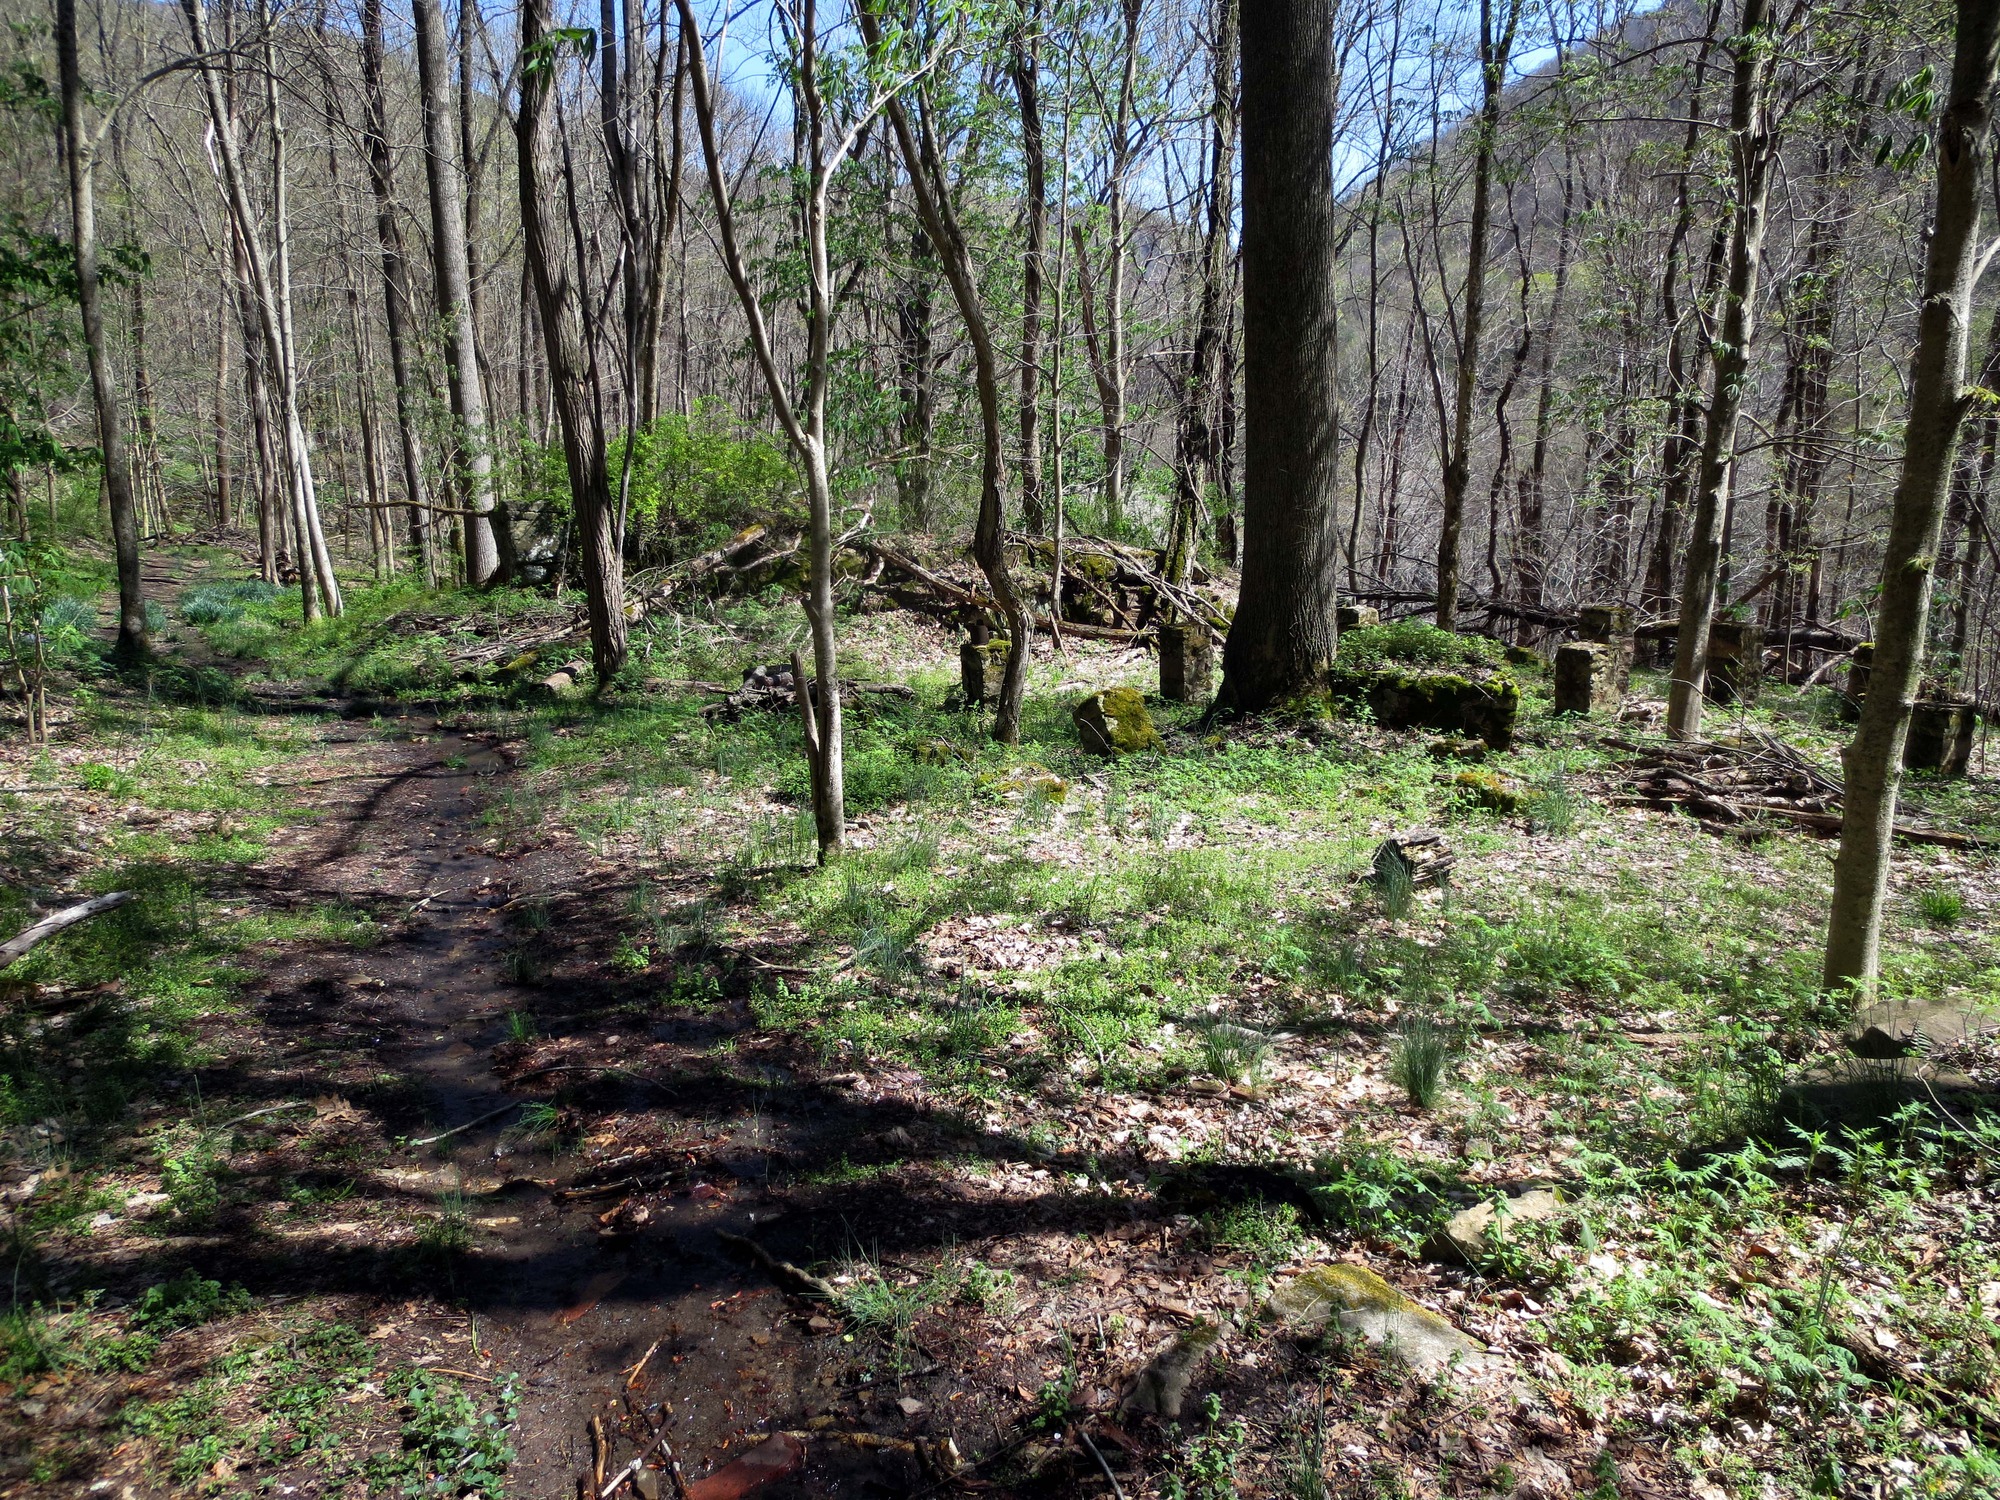 trail through forest with some old stone foundations alongside the trail